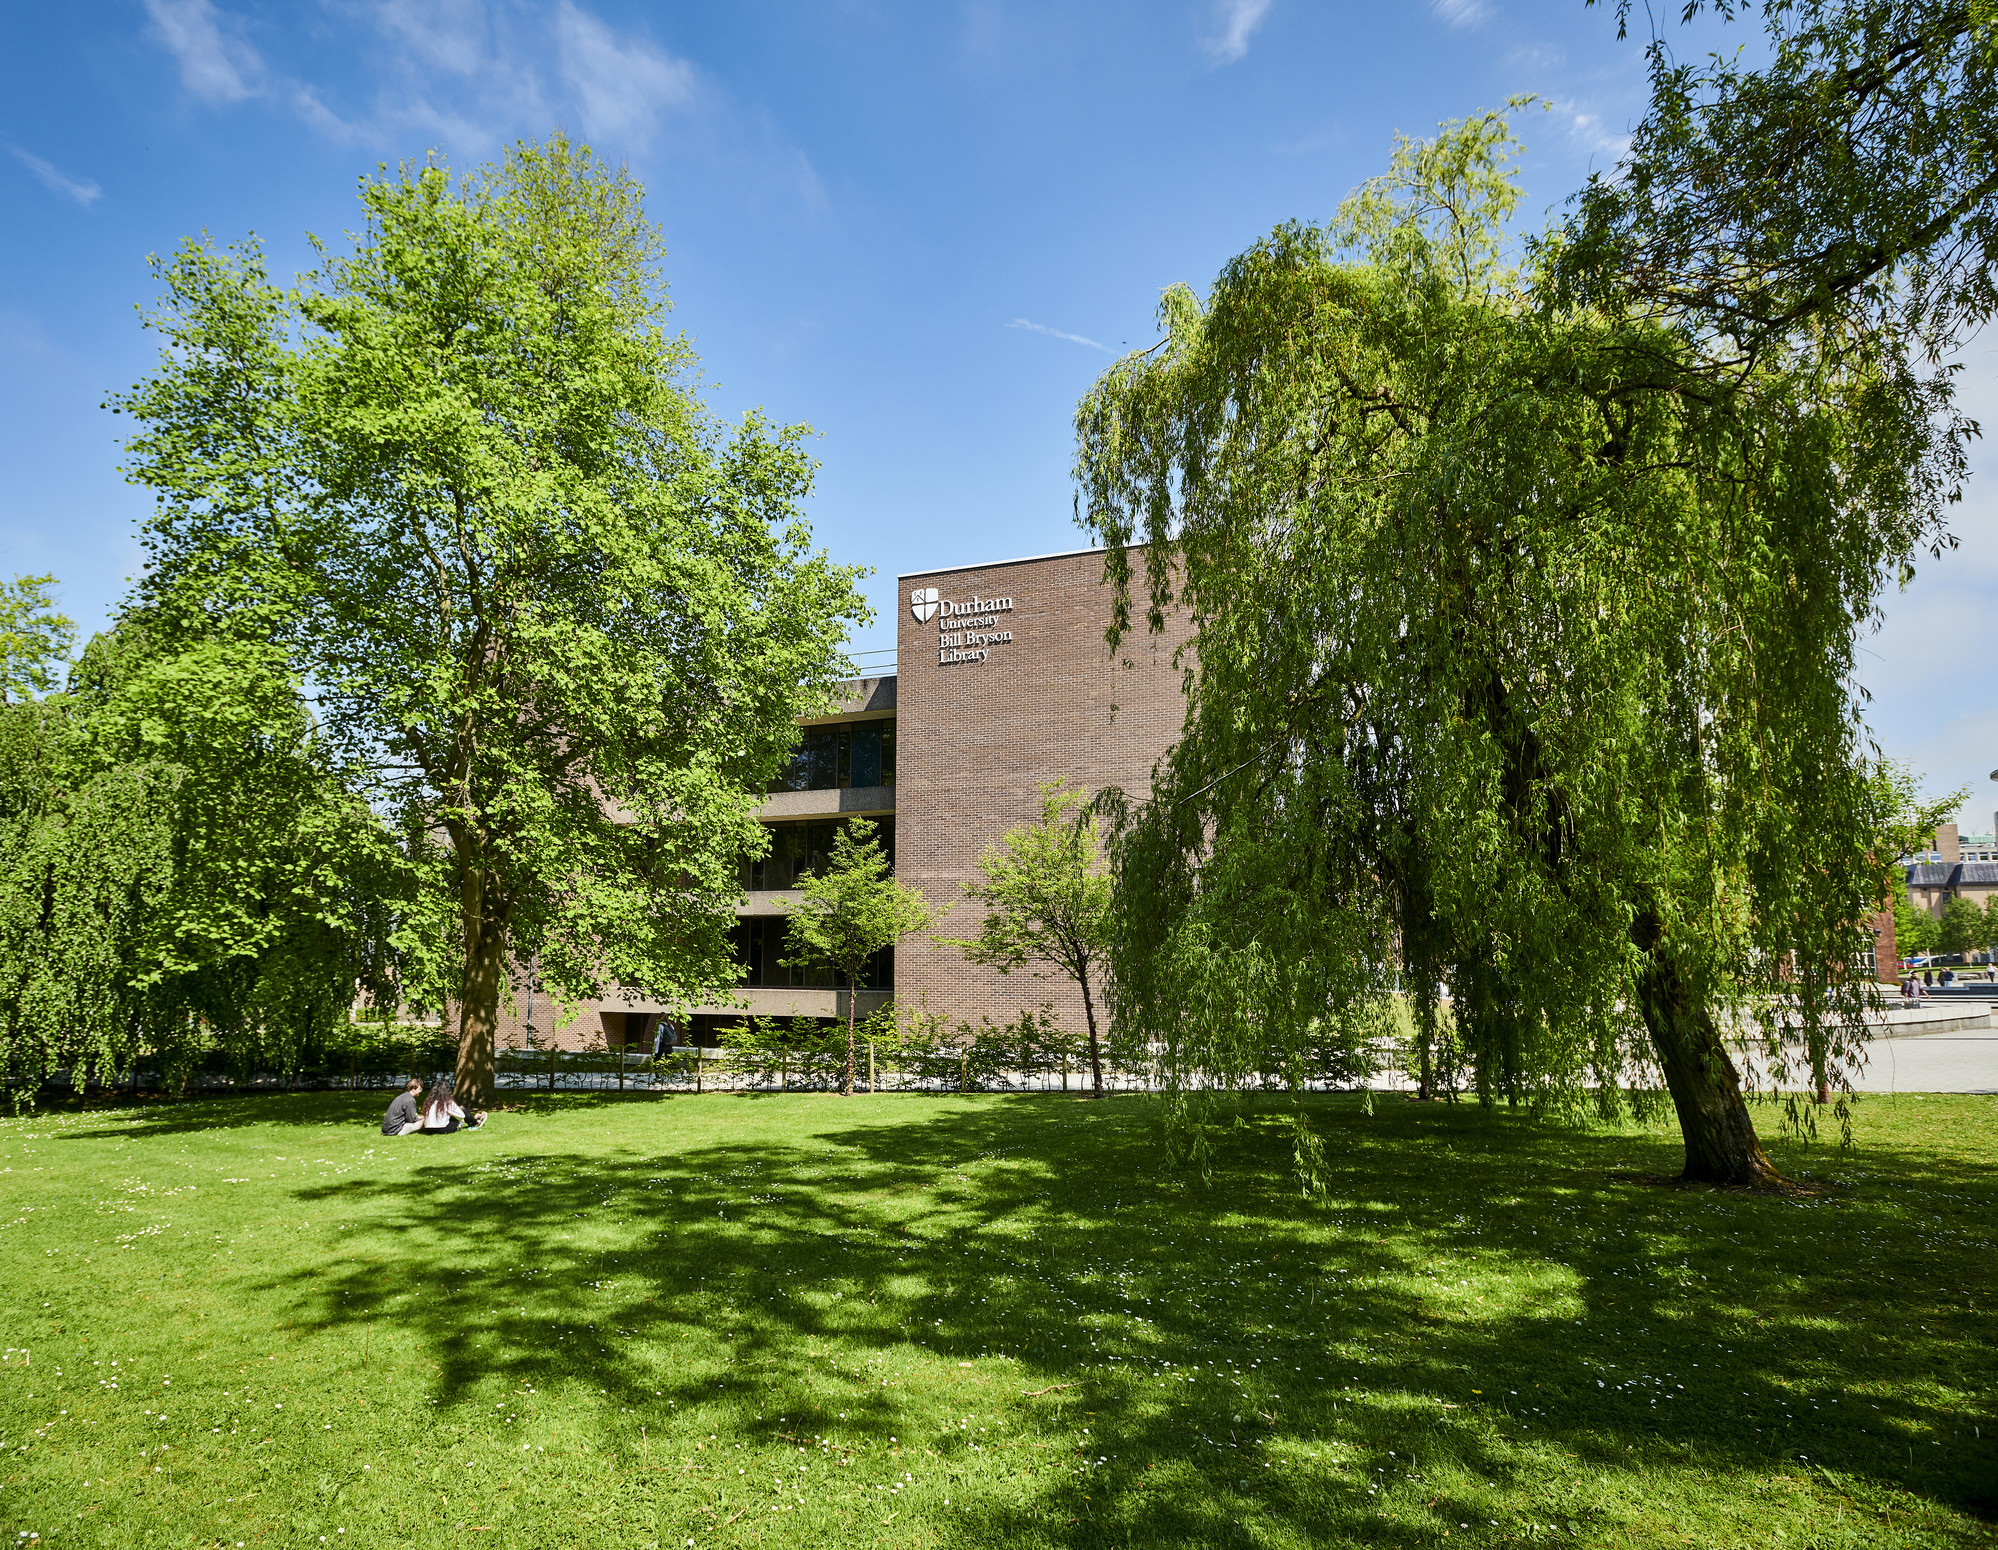 The Bill Bryson Library building with trees either side and in front